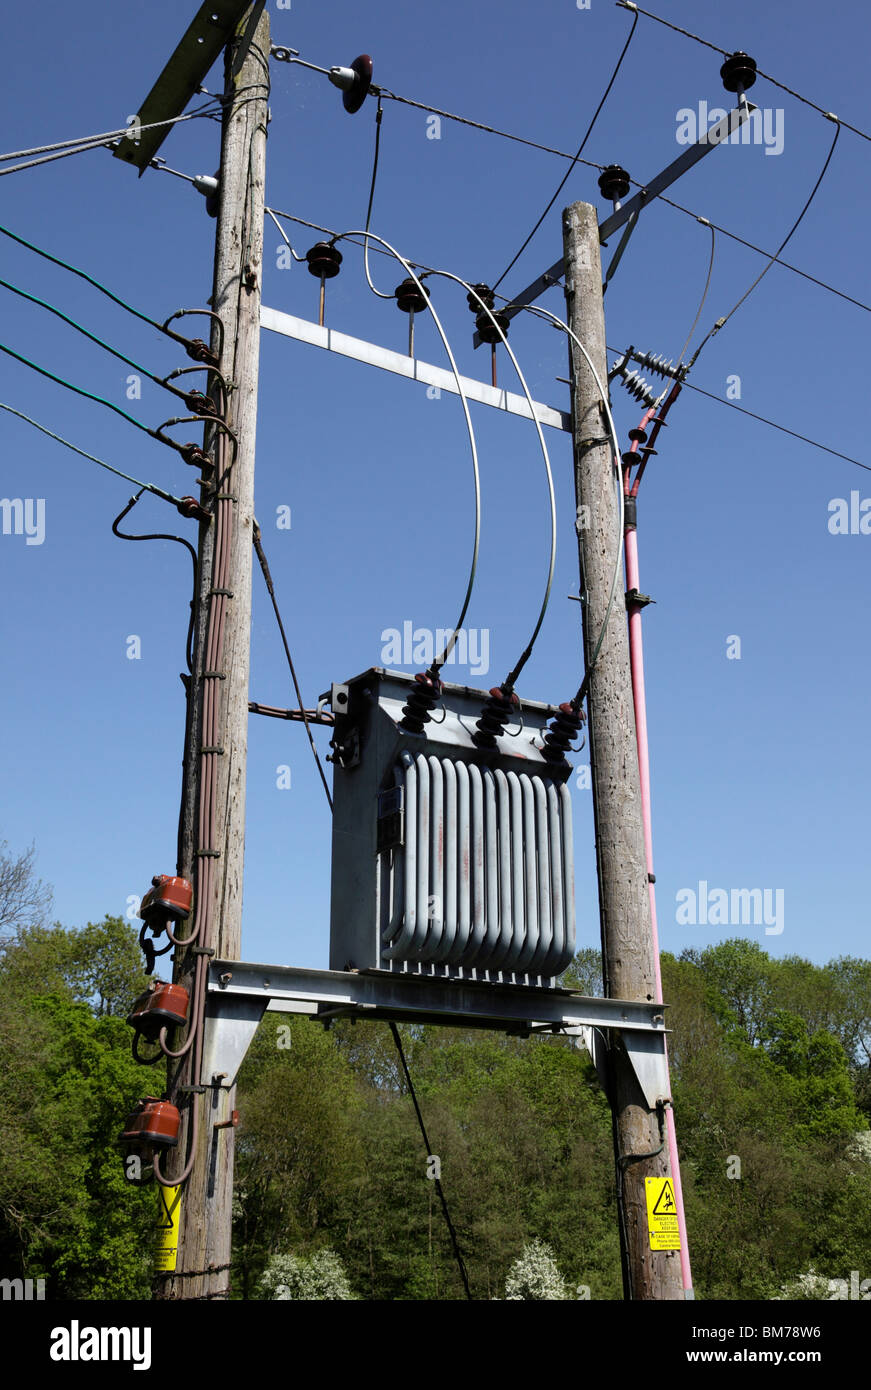 3 Phase electricity transformer mounted between 2 utility poles Upper Arley Village Worcestershire UK Stock Photo